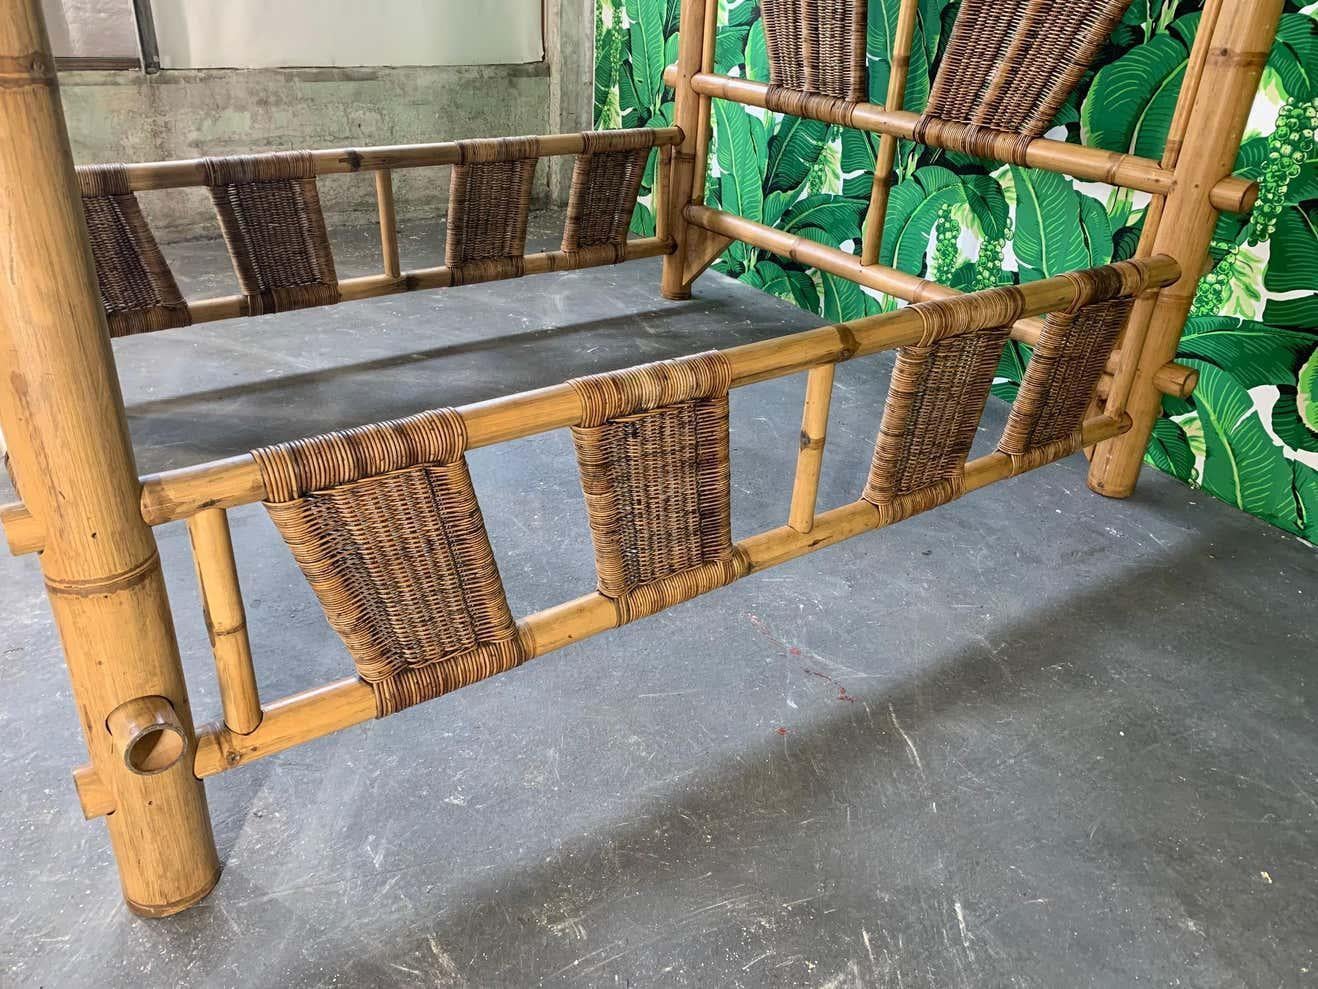 1970s Bamboo and Rattan Queen Size Four Poster Canopy Bed In Good Condition For Sale In Jacksonville, FL